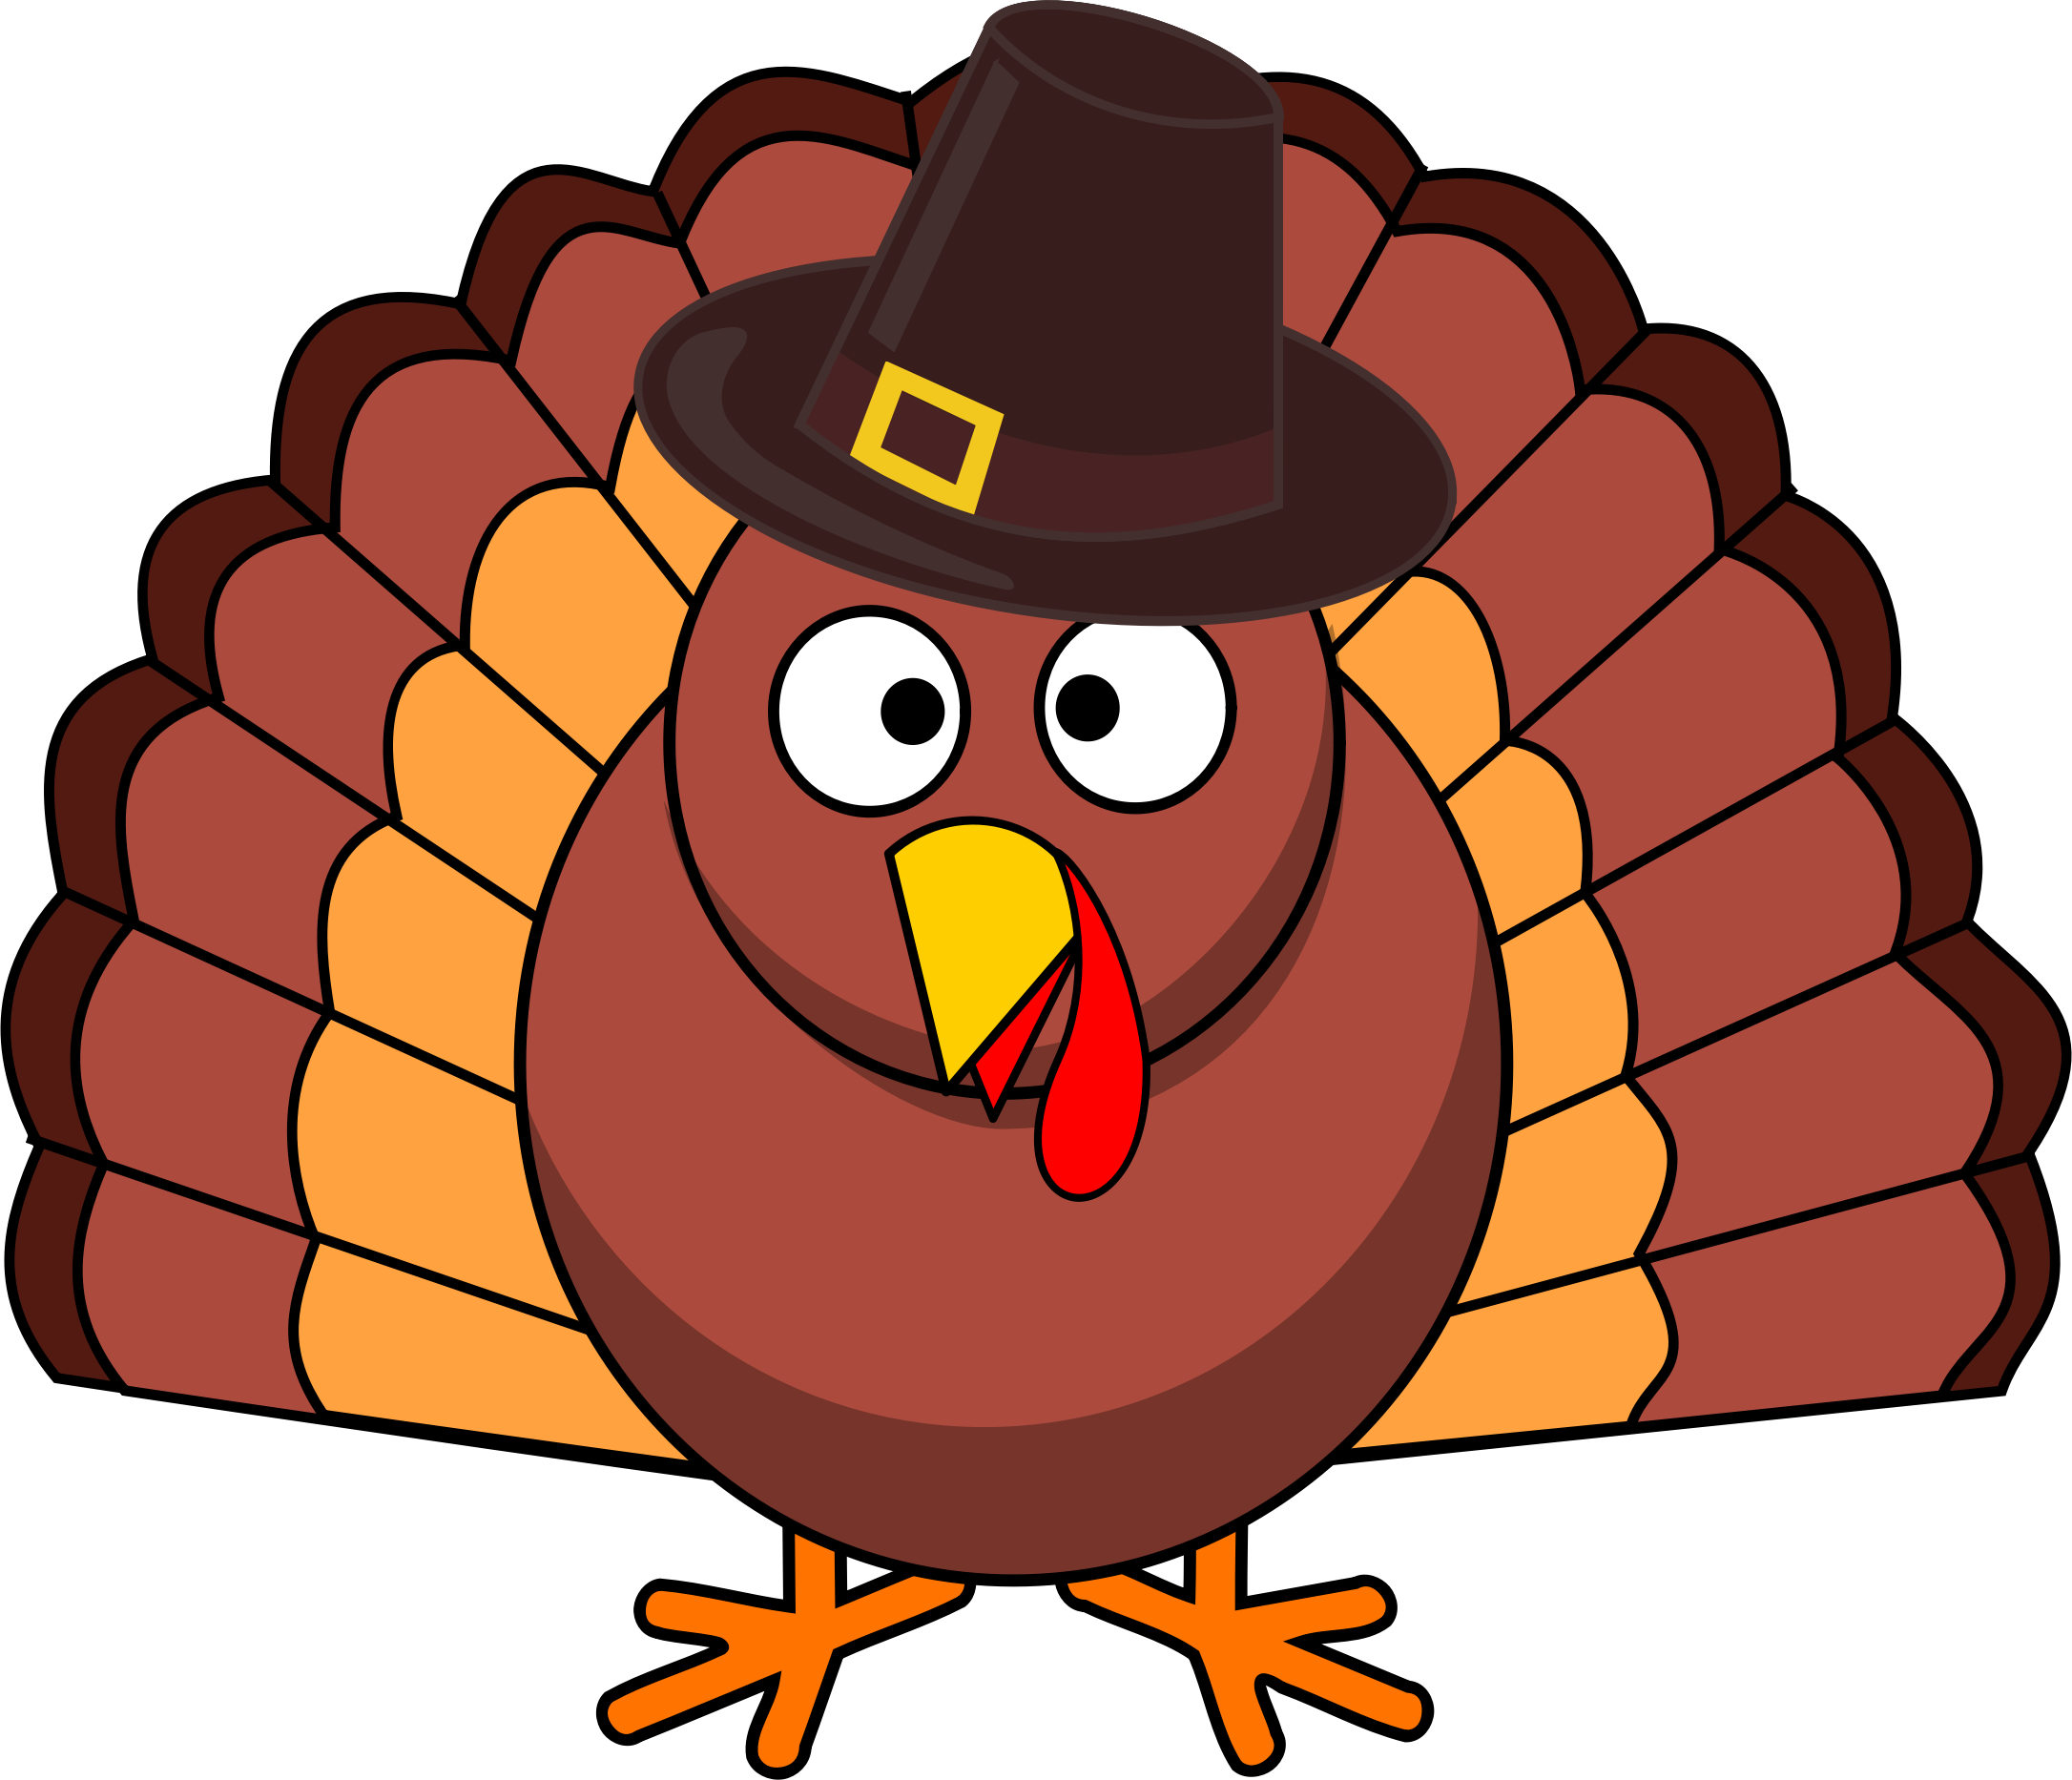 Funny Thanksgiving Turkey Cartoon Picture, Clipart Image